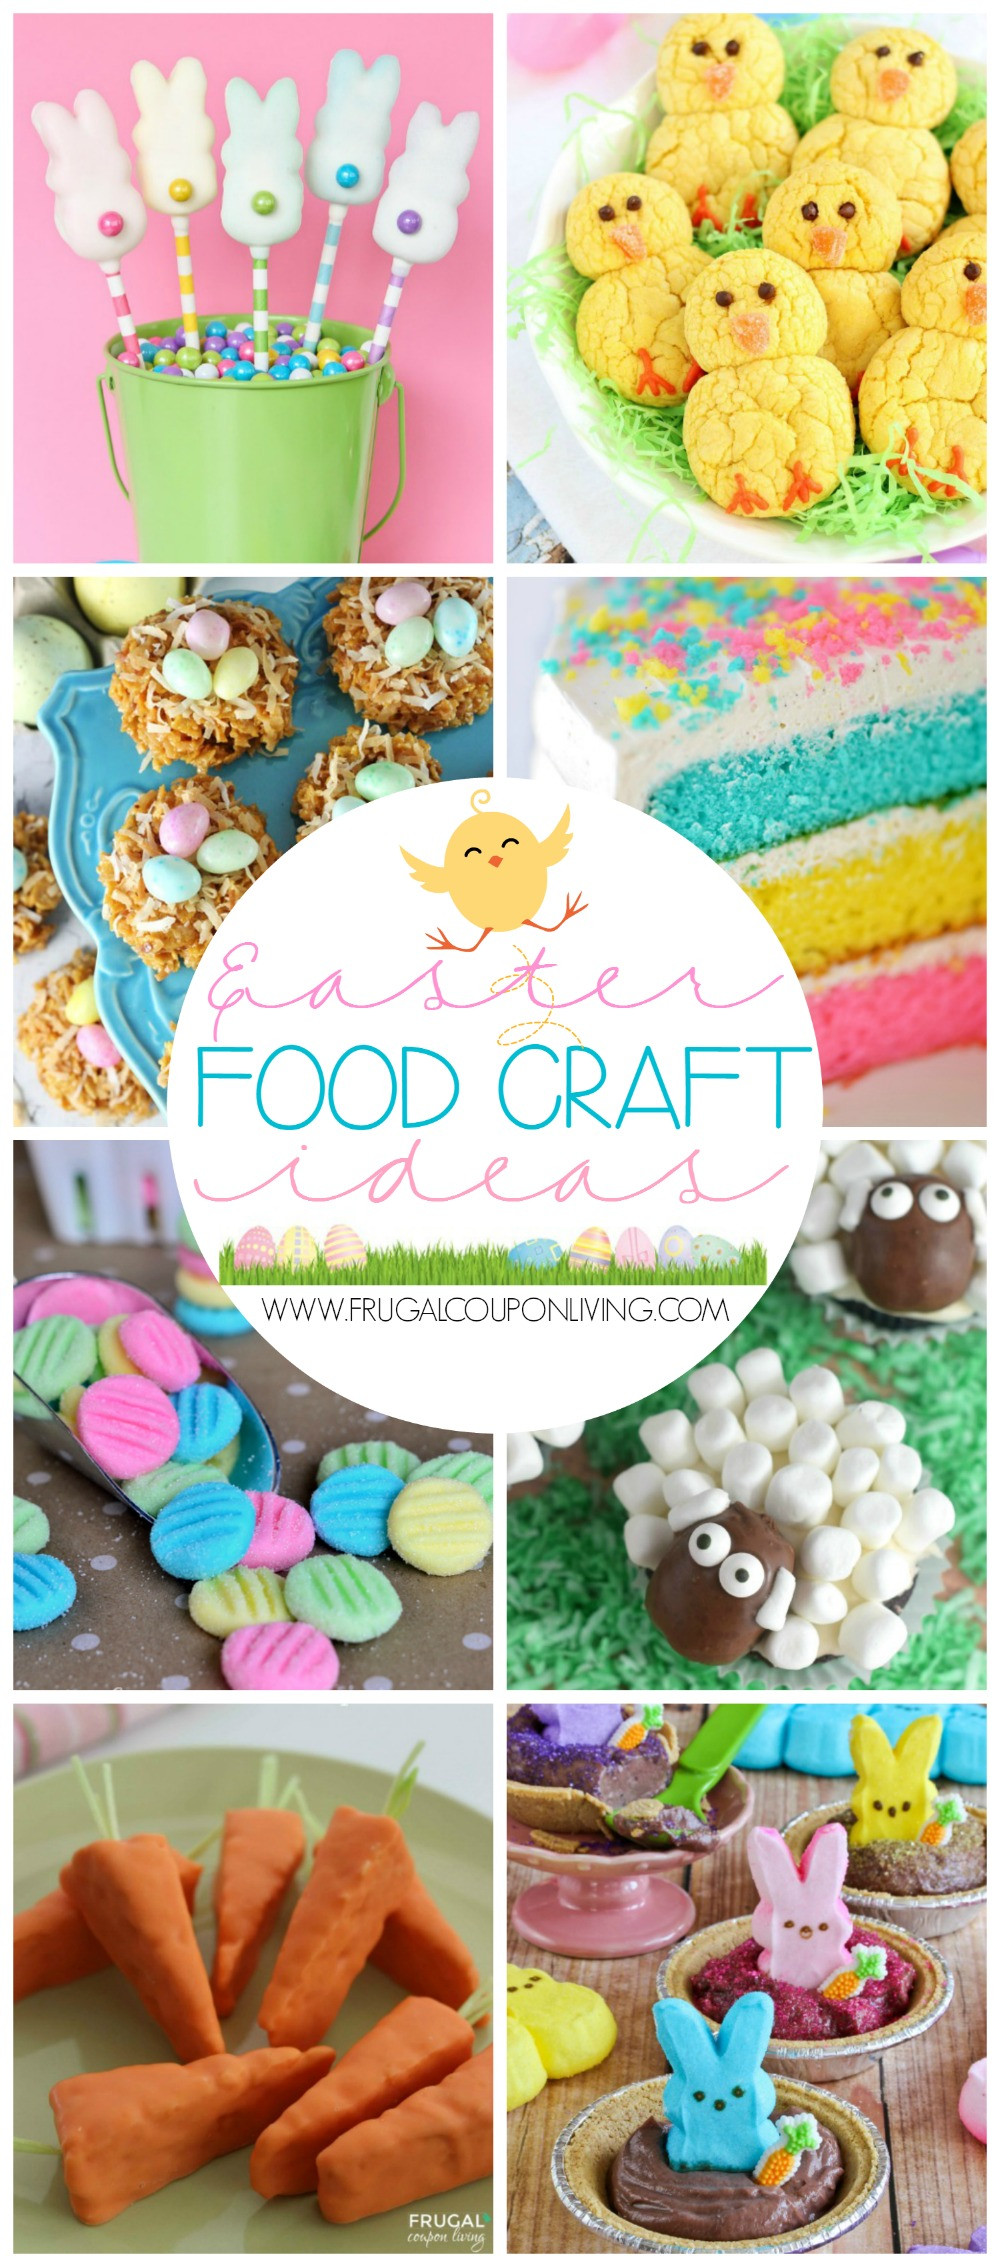 Easter Party Craft Ideas
 Easter Food Craft Ideas for the Kids